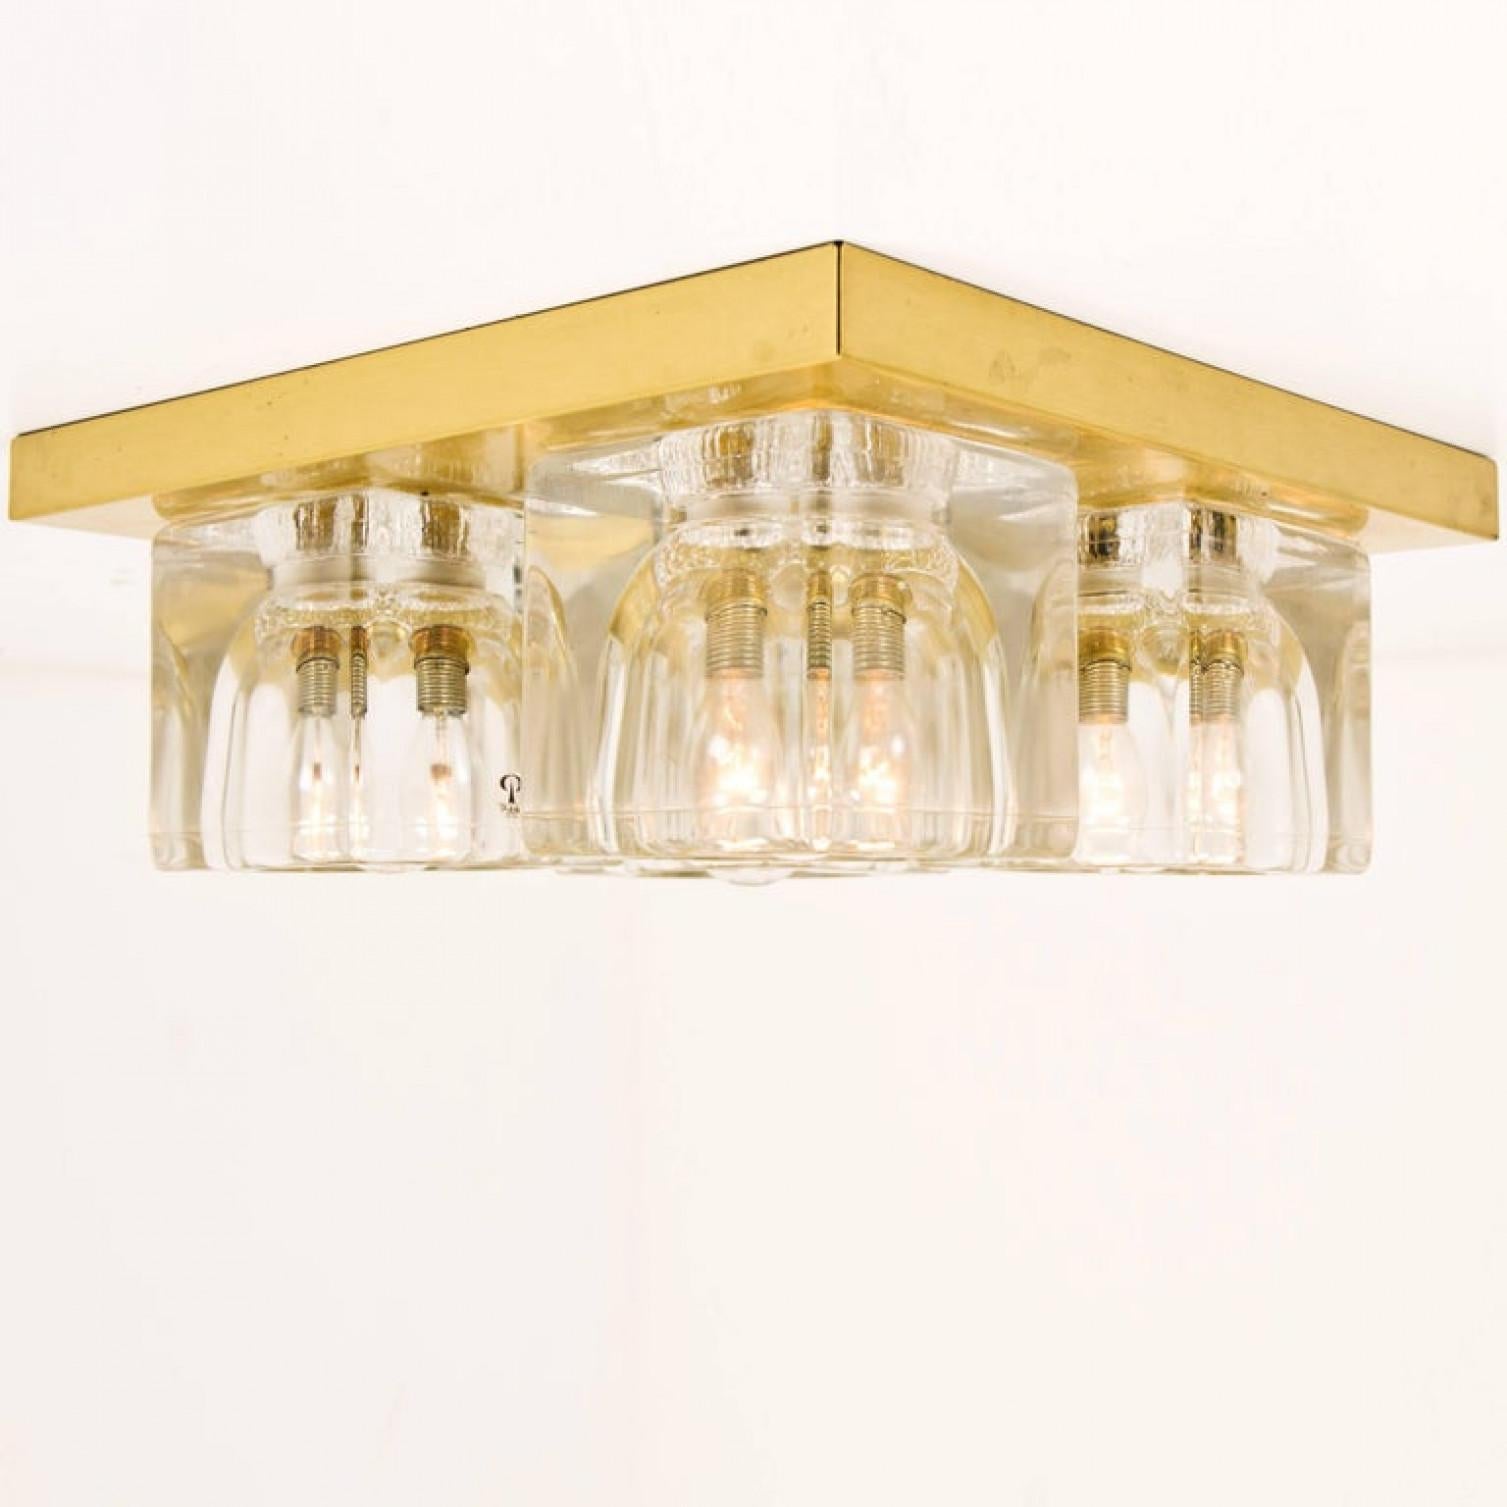 1 of 4 Peill & Putzler Wall Light Ceiling Light, Brass and Glass, Germany, 1970 For Sale 2